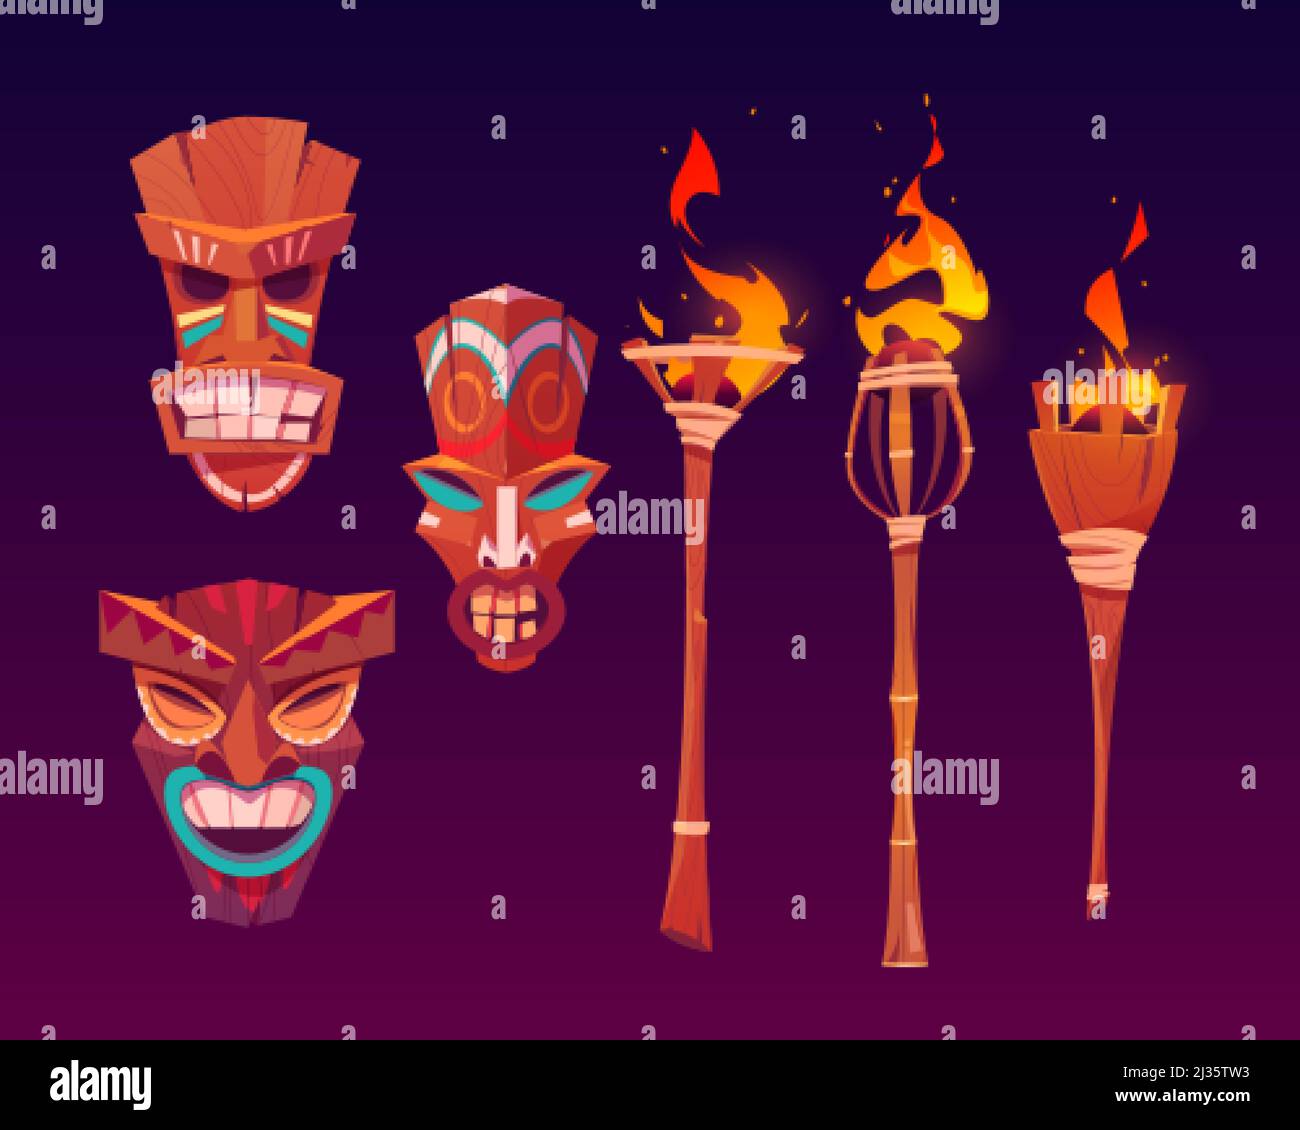 Tiki masks and burning torches, tribal wooden totems, hawaiian or polynesian attributes, scary faces with toothy mouth decorated with painting isolate Stock Vector